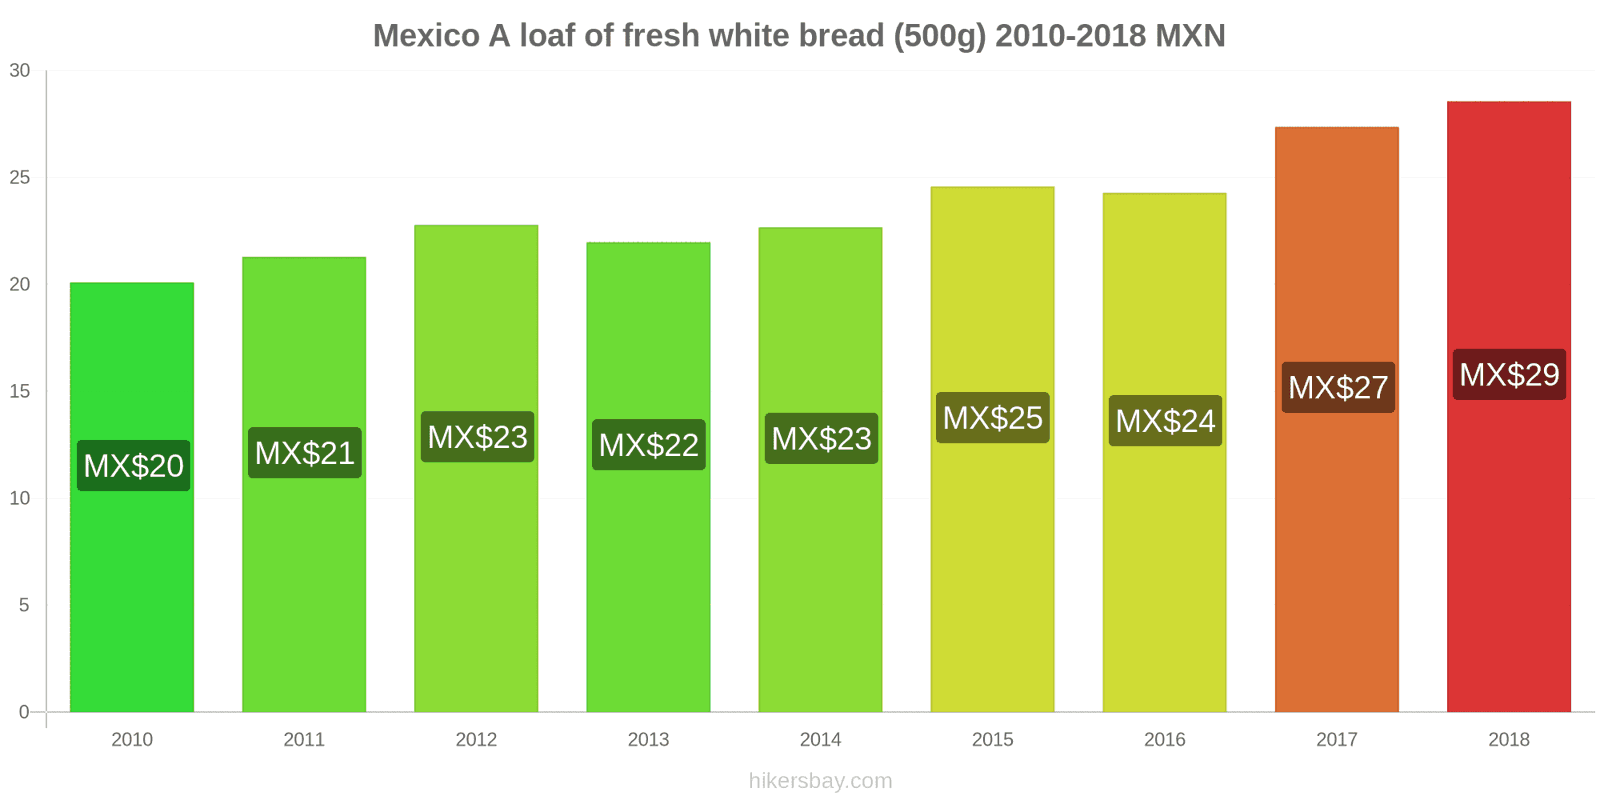 Mexico price changes A loaf of fresh white bread (500g) hikersbay.com